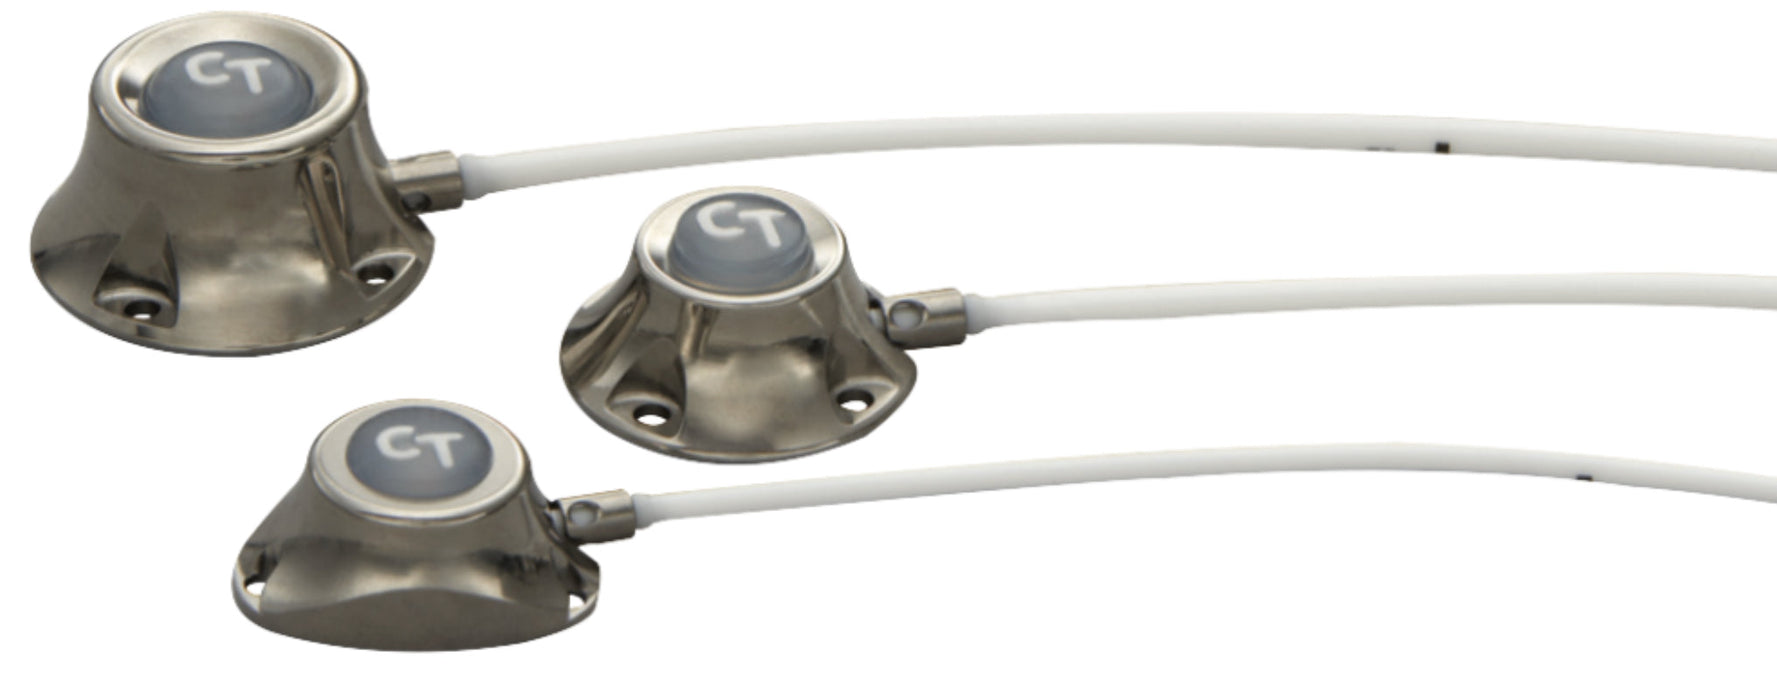 Port-A-Cath Power P.A.C Implantable Vascular Access System Tray w/ 7Fr SafeSheath Valved Introducer, Wing-Lock Connector & Dual Lumen Low Profile Portal